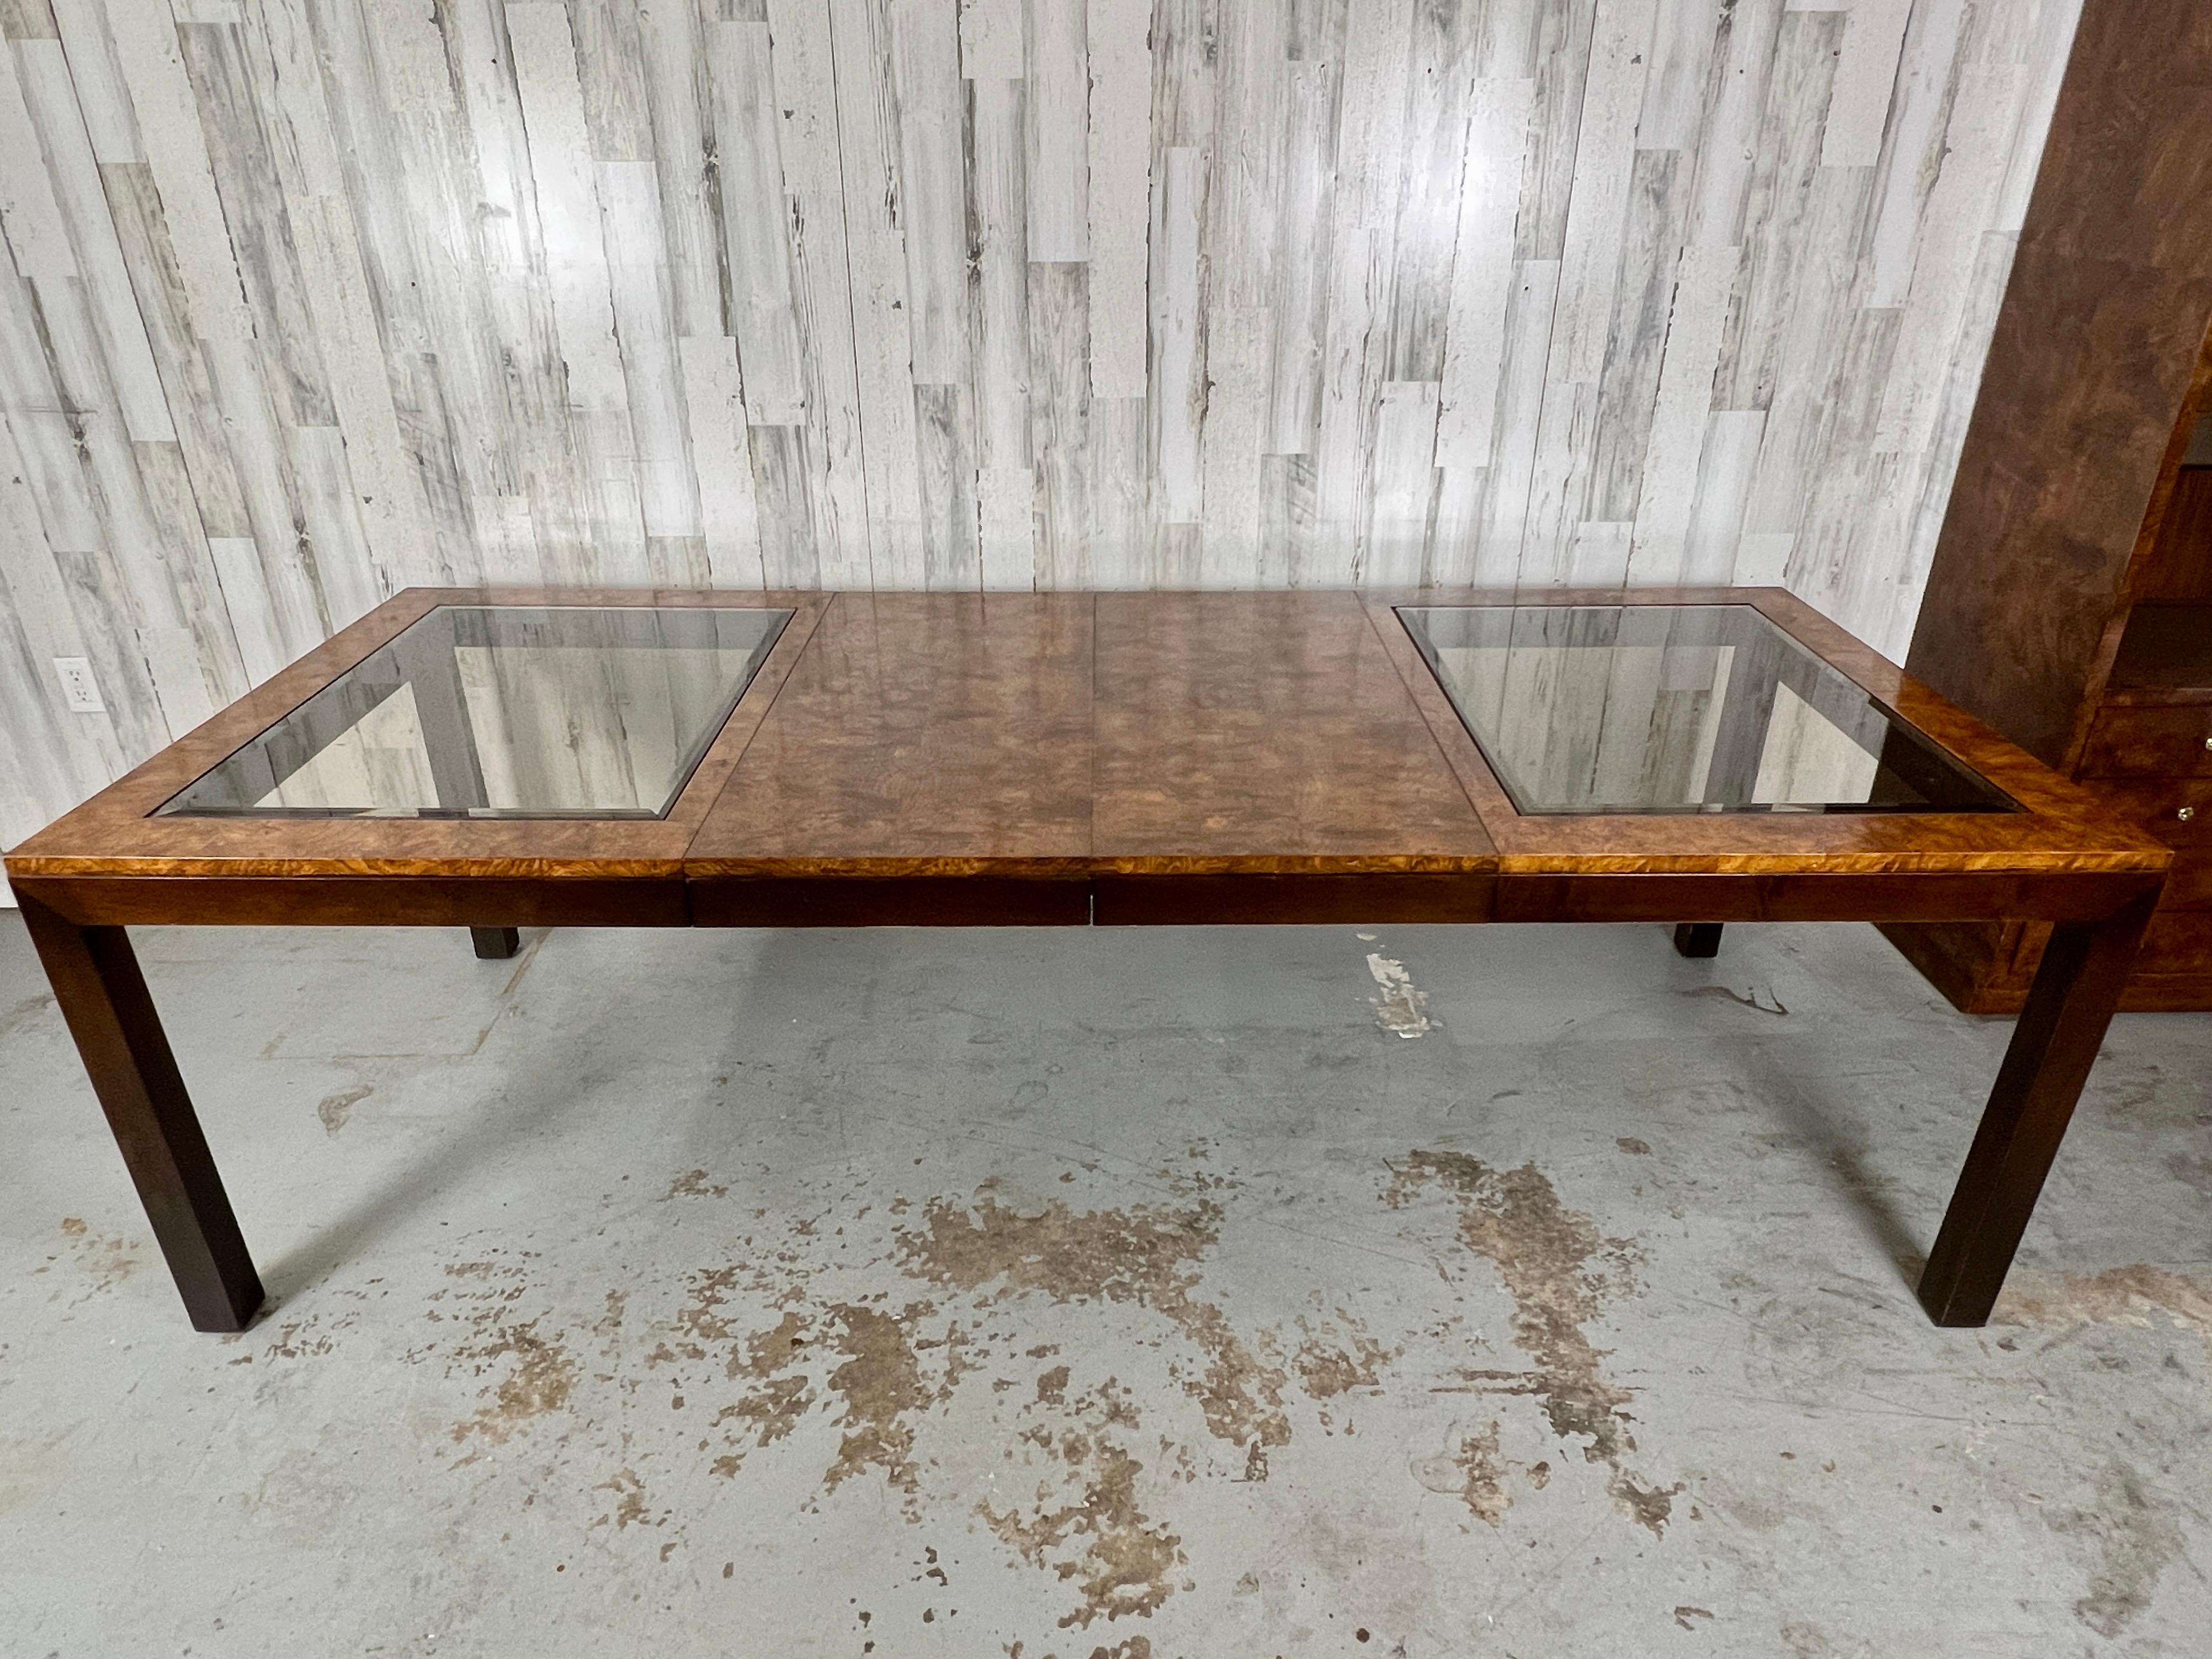 Burl & smoked glass extendable dining table by Century Furniture. This table is a show stopper for someone who loves to entertain lots of guests. Incredible burl wood with smoked glass insets on top. 

Fully extended is 96 L. Each leaf is 18